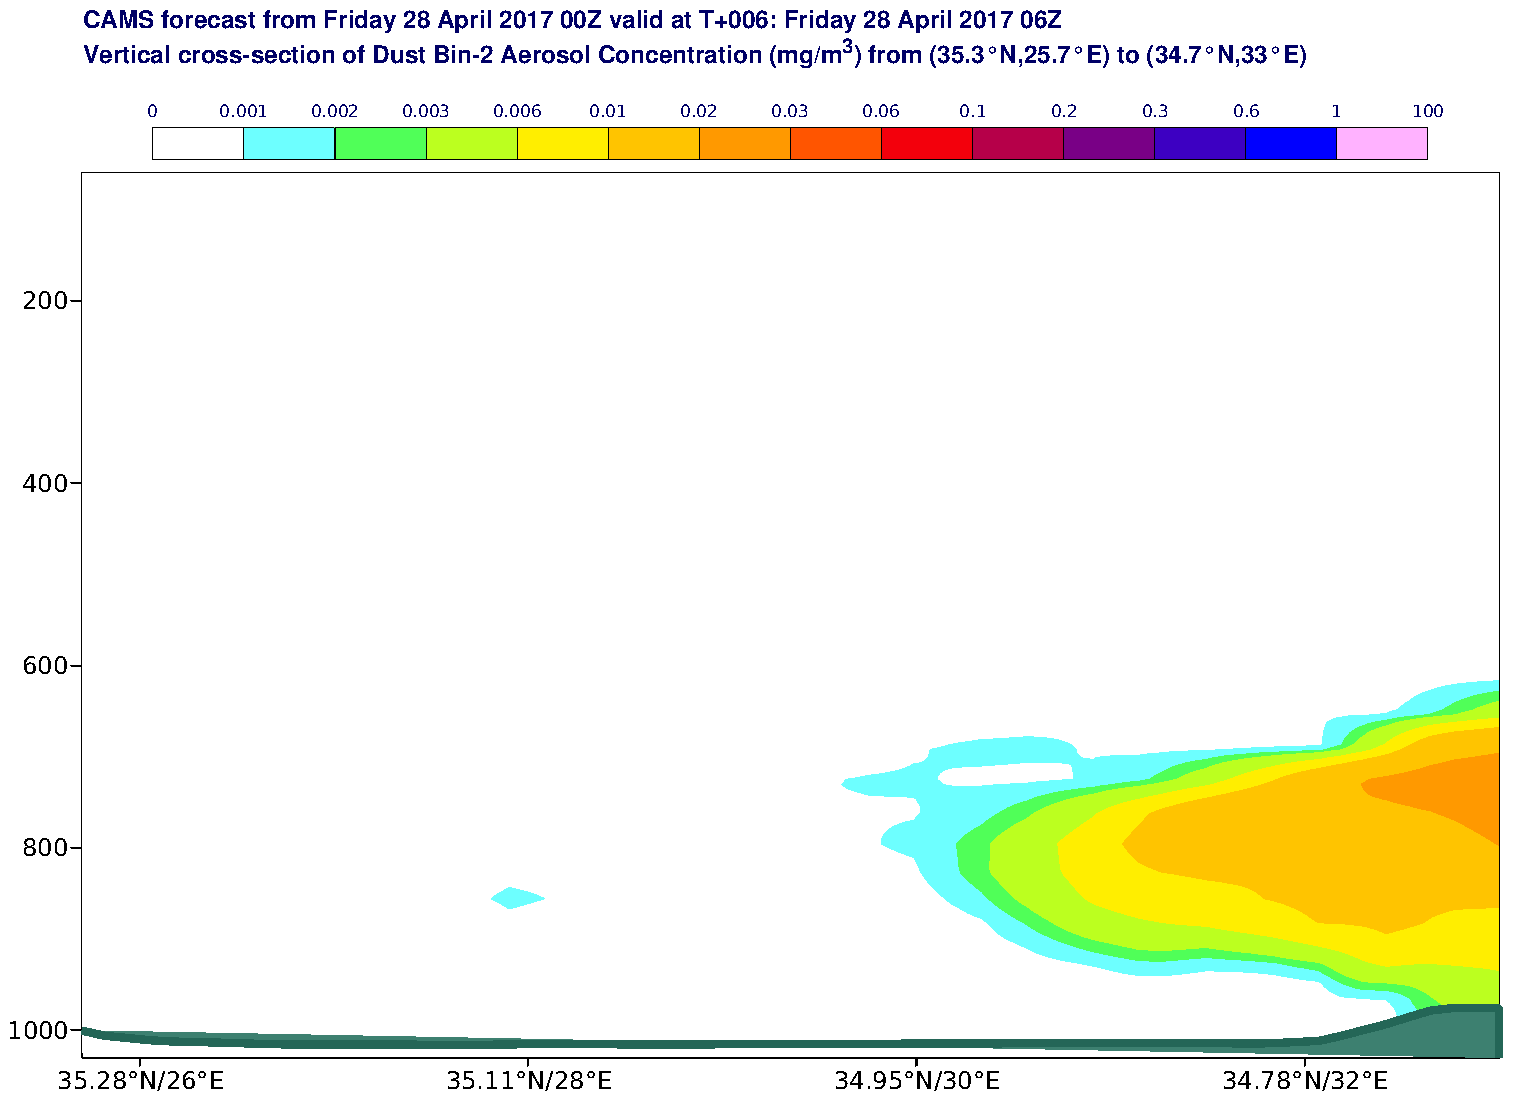 Vertical cross-section of Dust Bin-2 Aerosol Concentration (mg/m3) valid at T6 - 2017-04-28 06:00